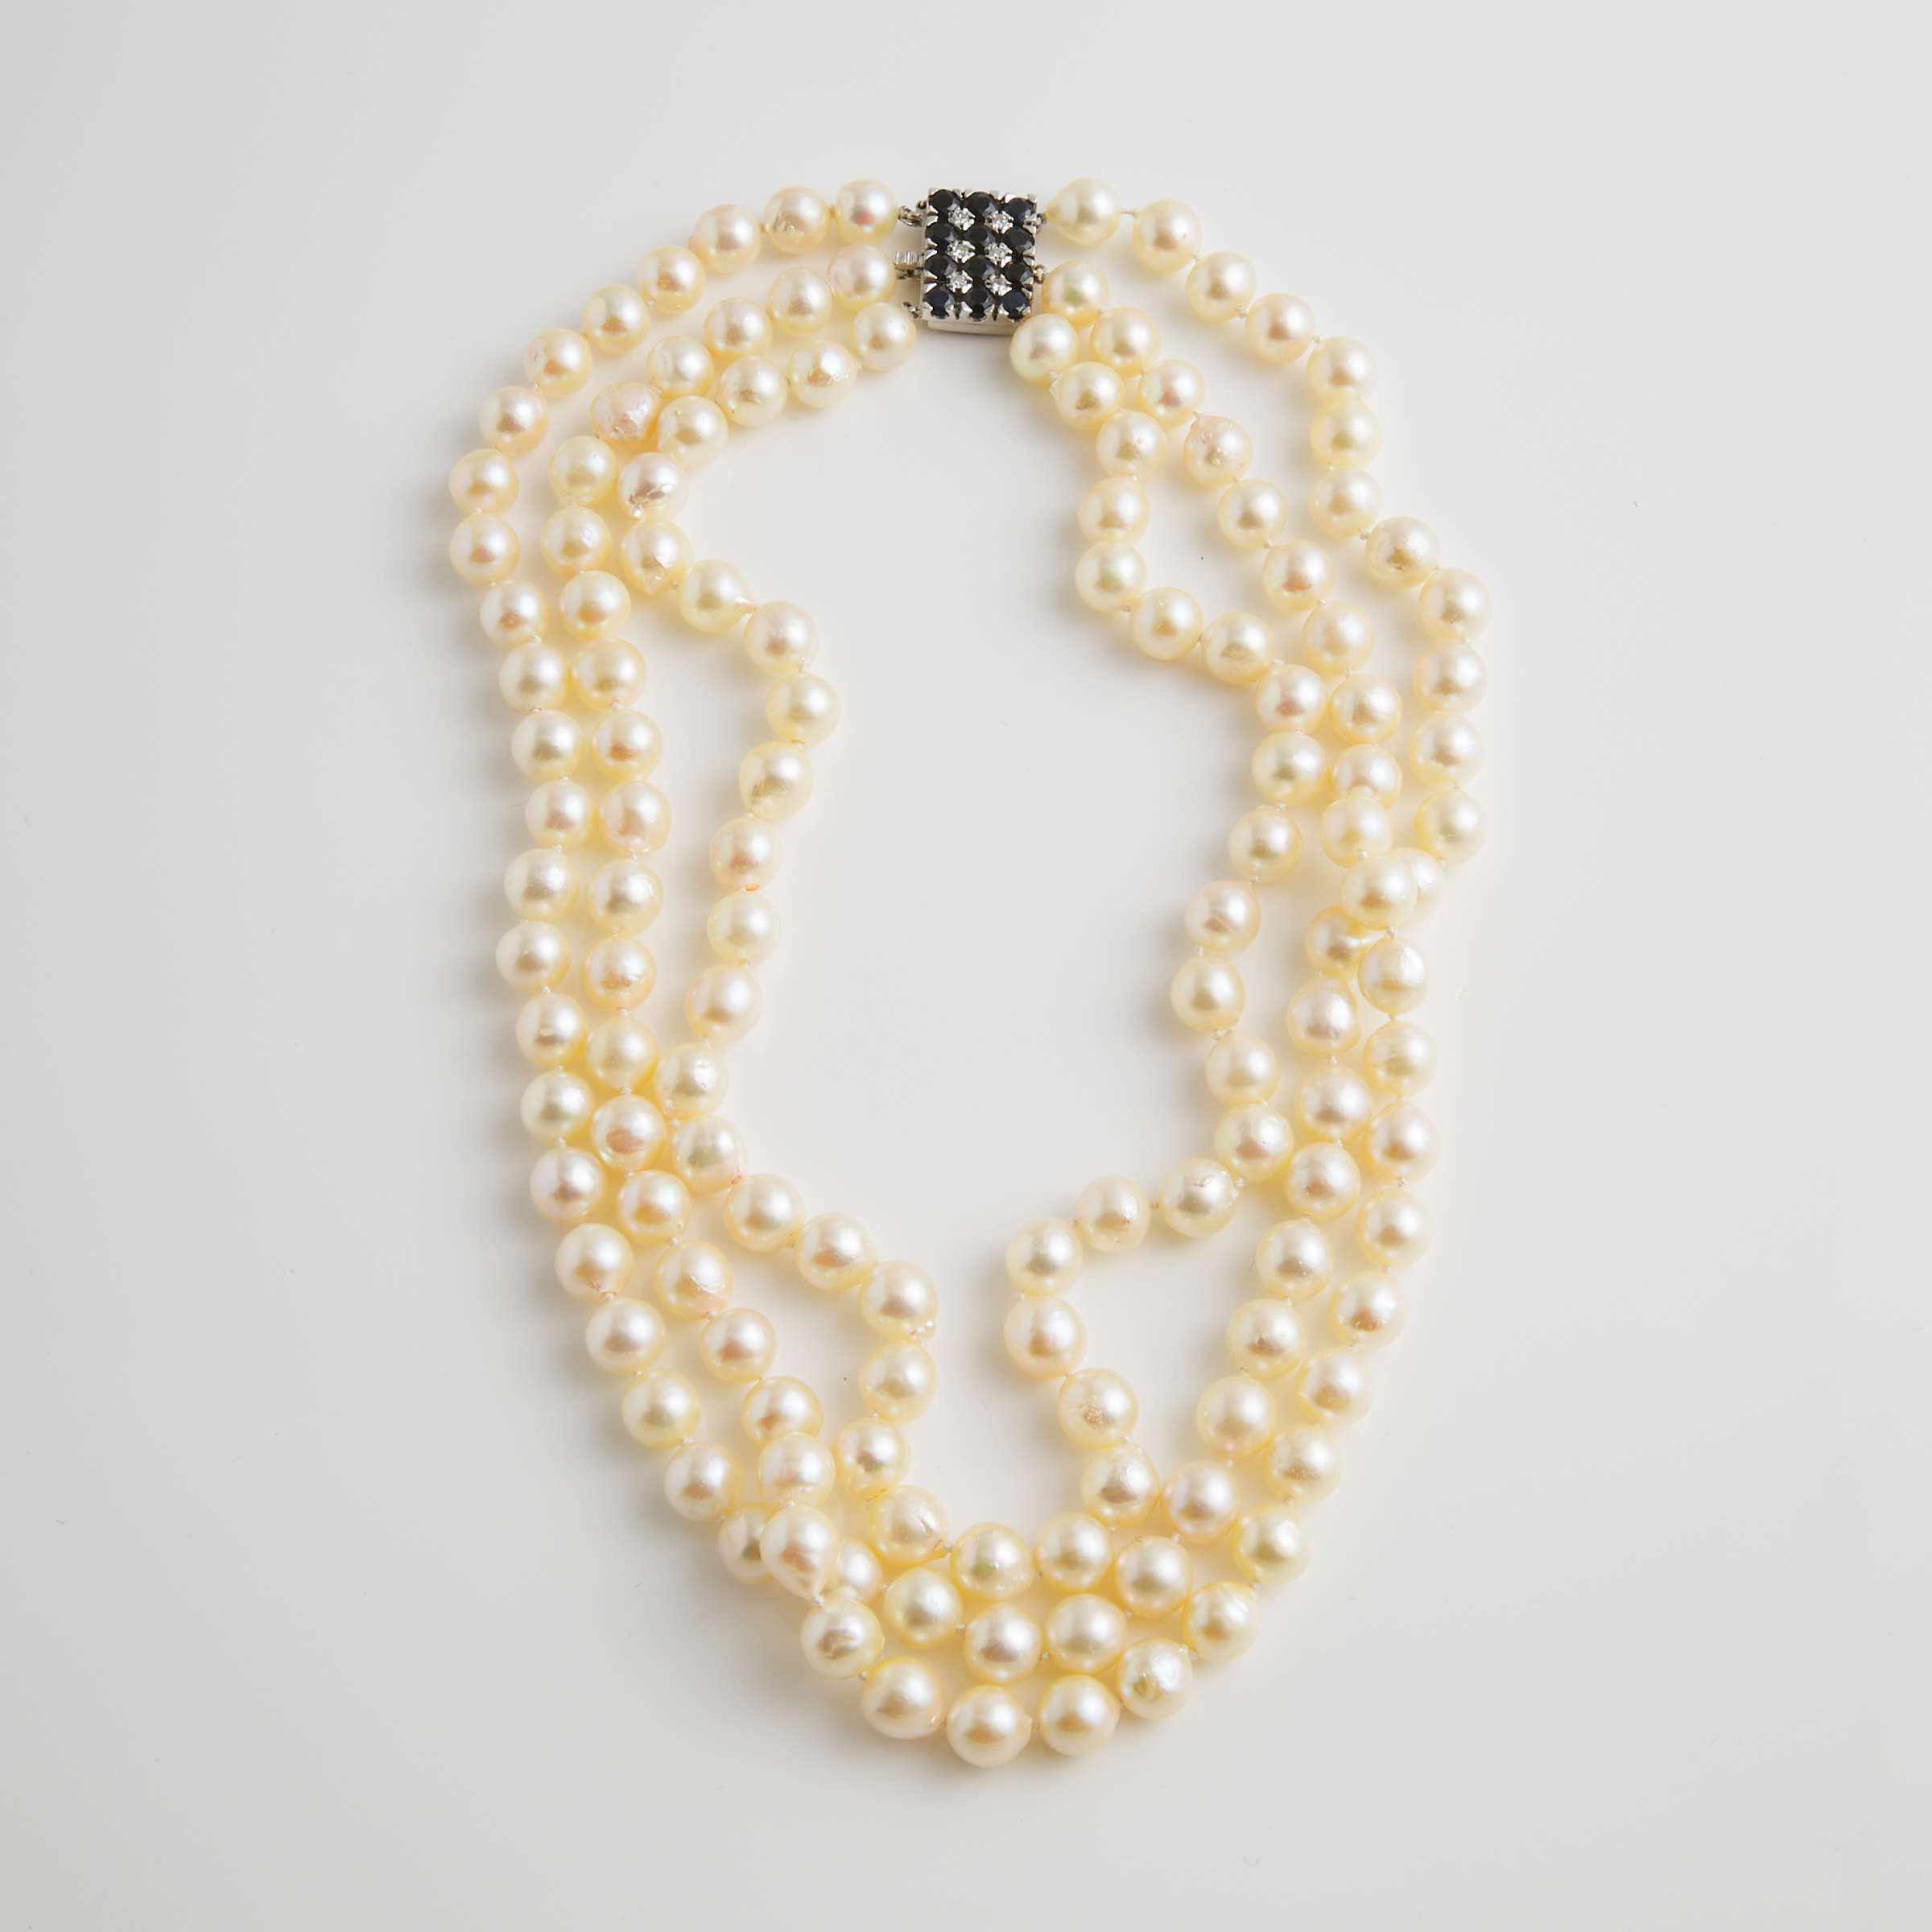 Triple Strand Baroque Cultured Pearl Necklace